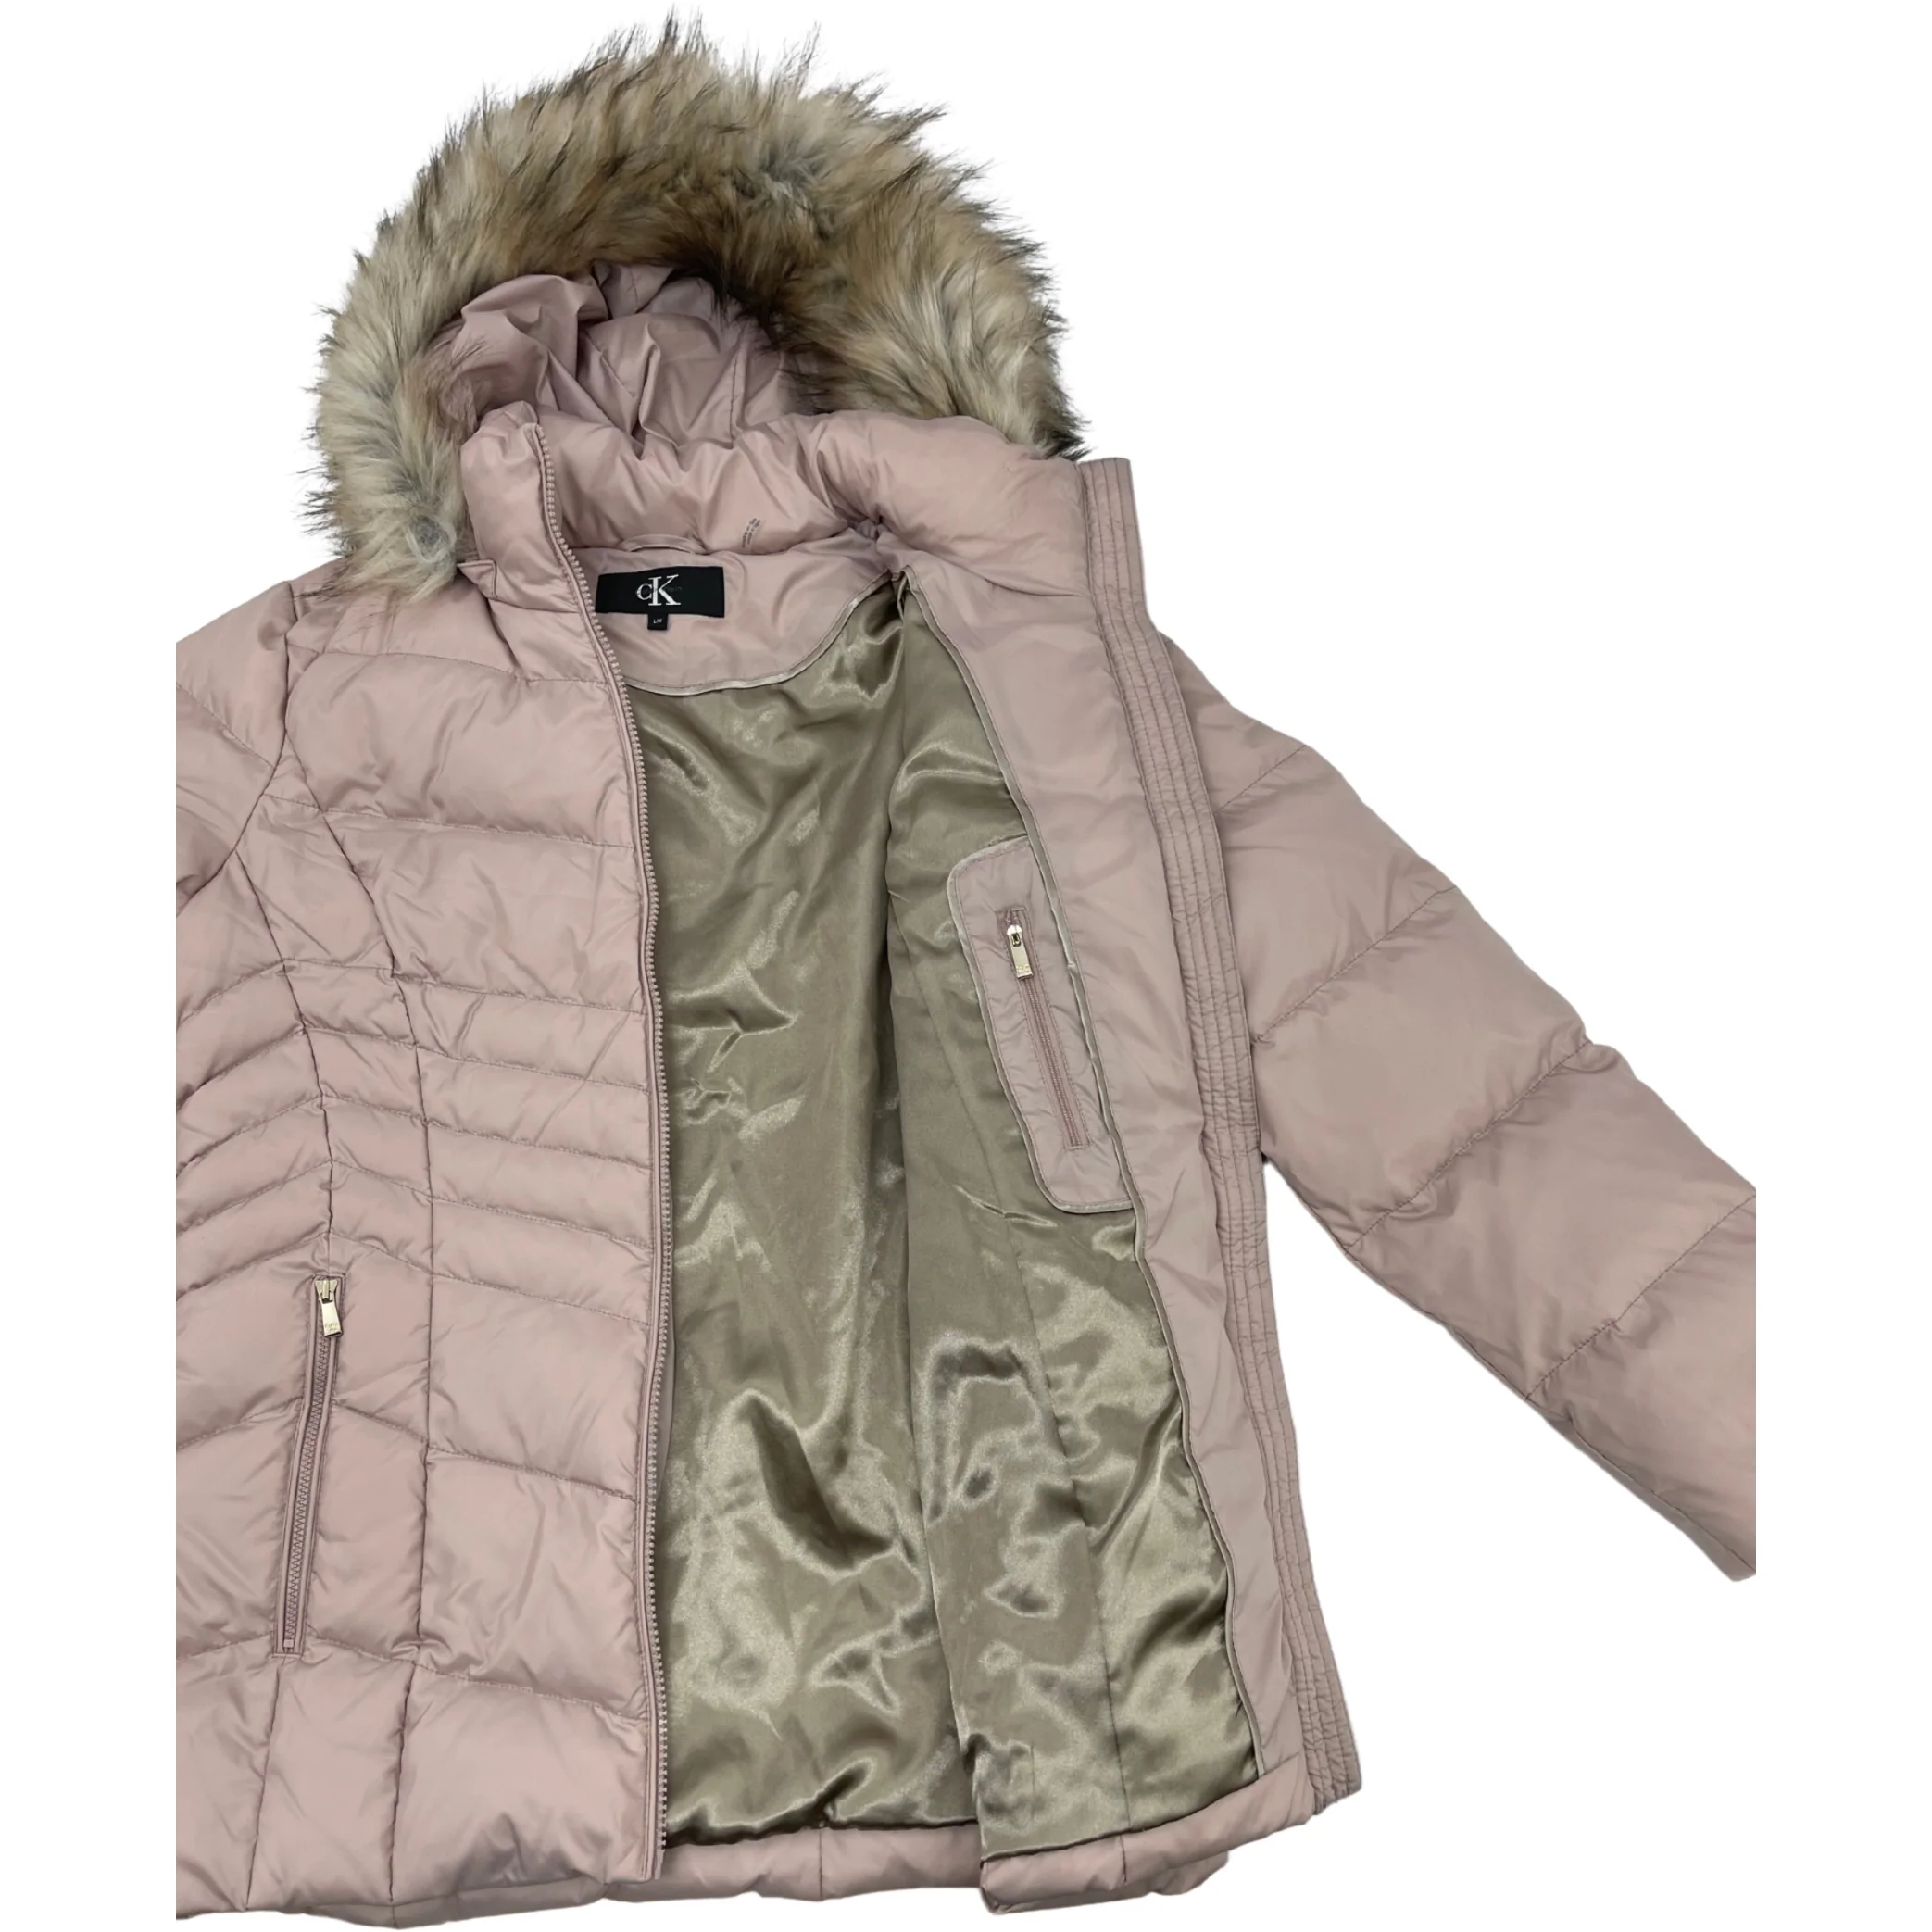 Calvin Klein Women's Winter Jacket / Light Pink / Size L **No Tags** –  CanadaWide Liquidations